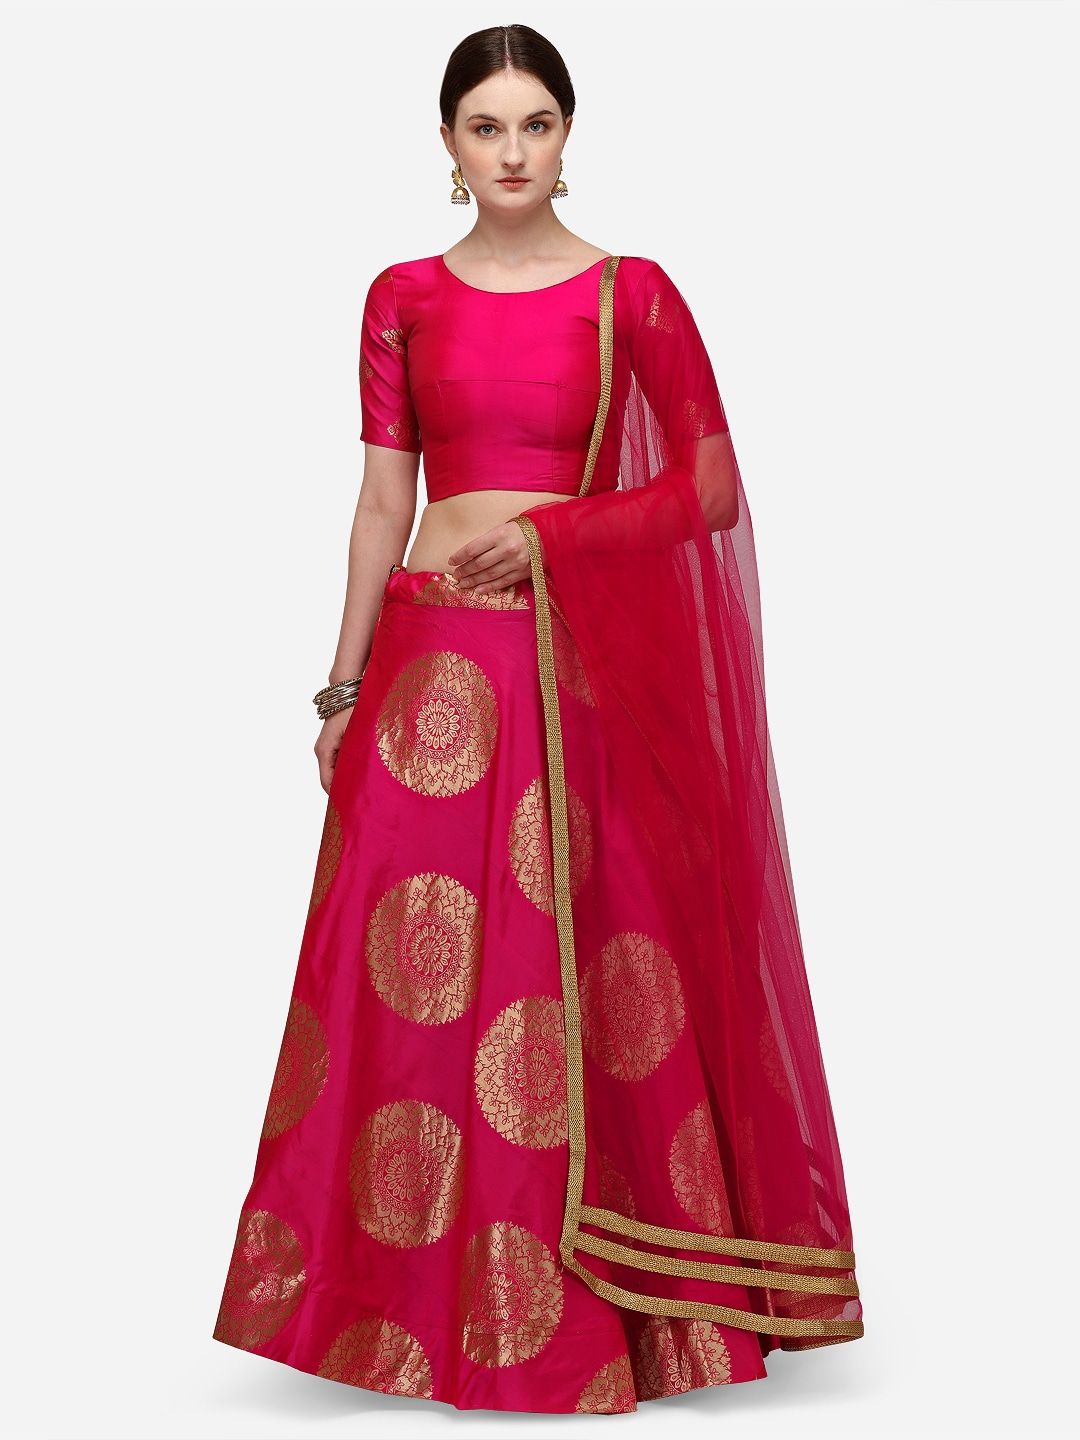 LOOKNBOOK ART Pink & Gold-Toned Semi-Stitched Lehenga & Unstitched Blouse With Dupatta Price in India